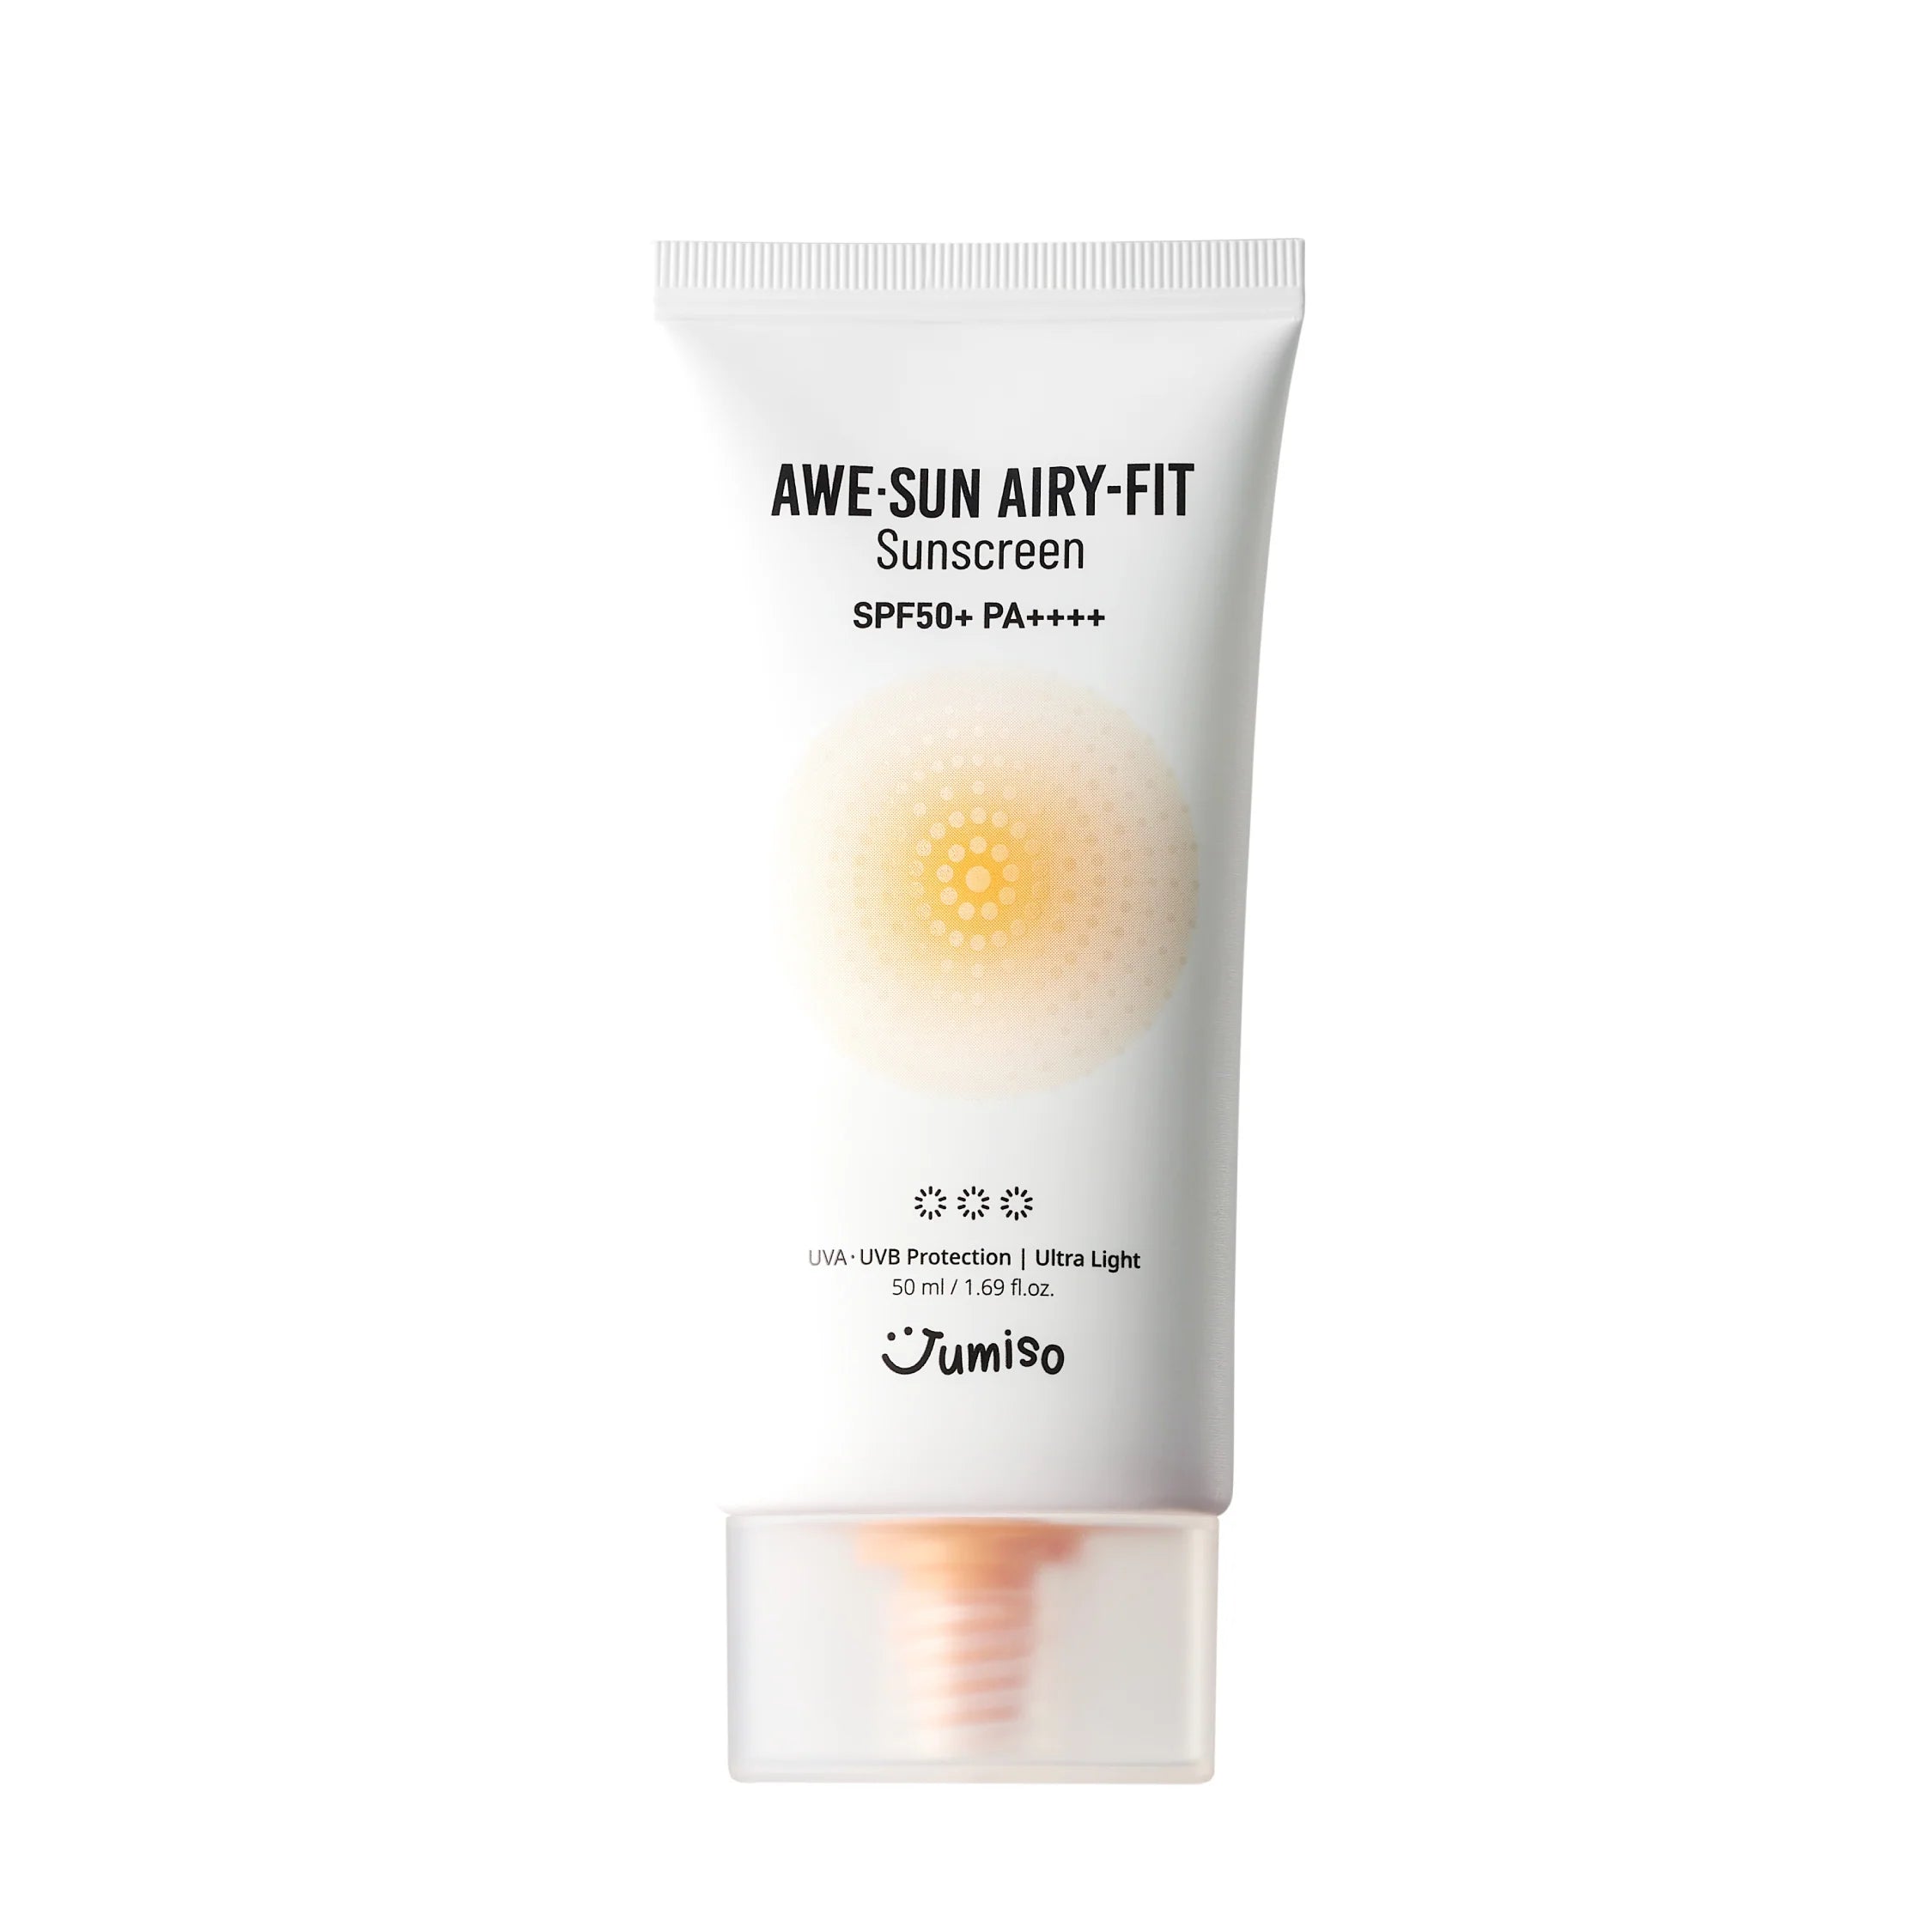 Awesun Airy Fit Sunscreen SPF50+ PA++++